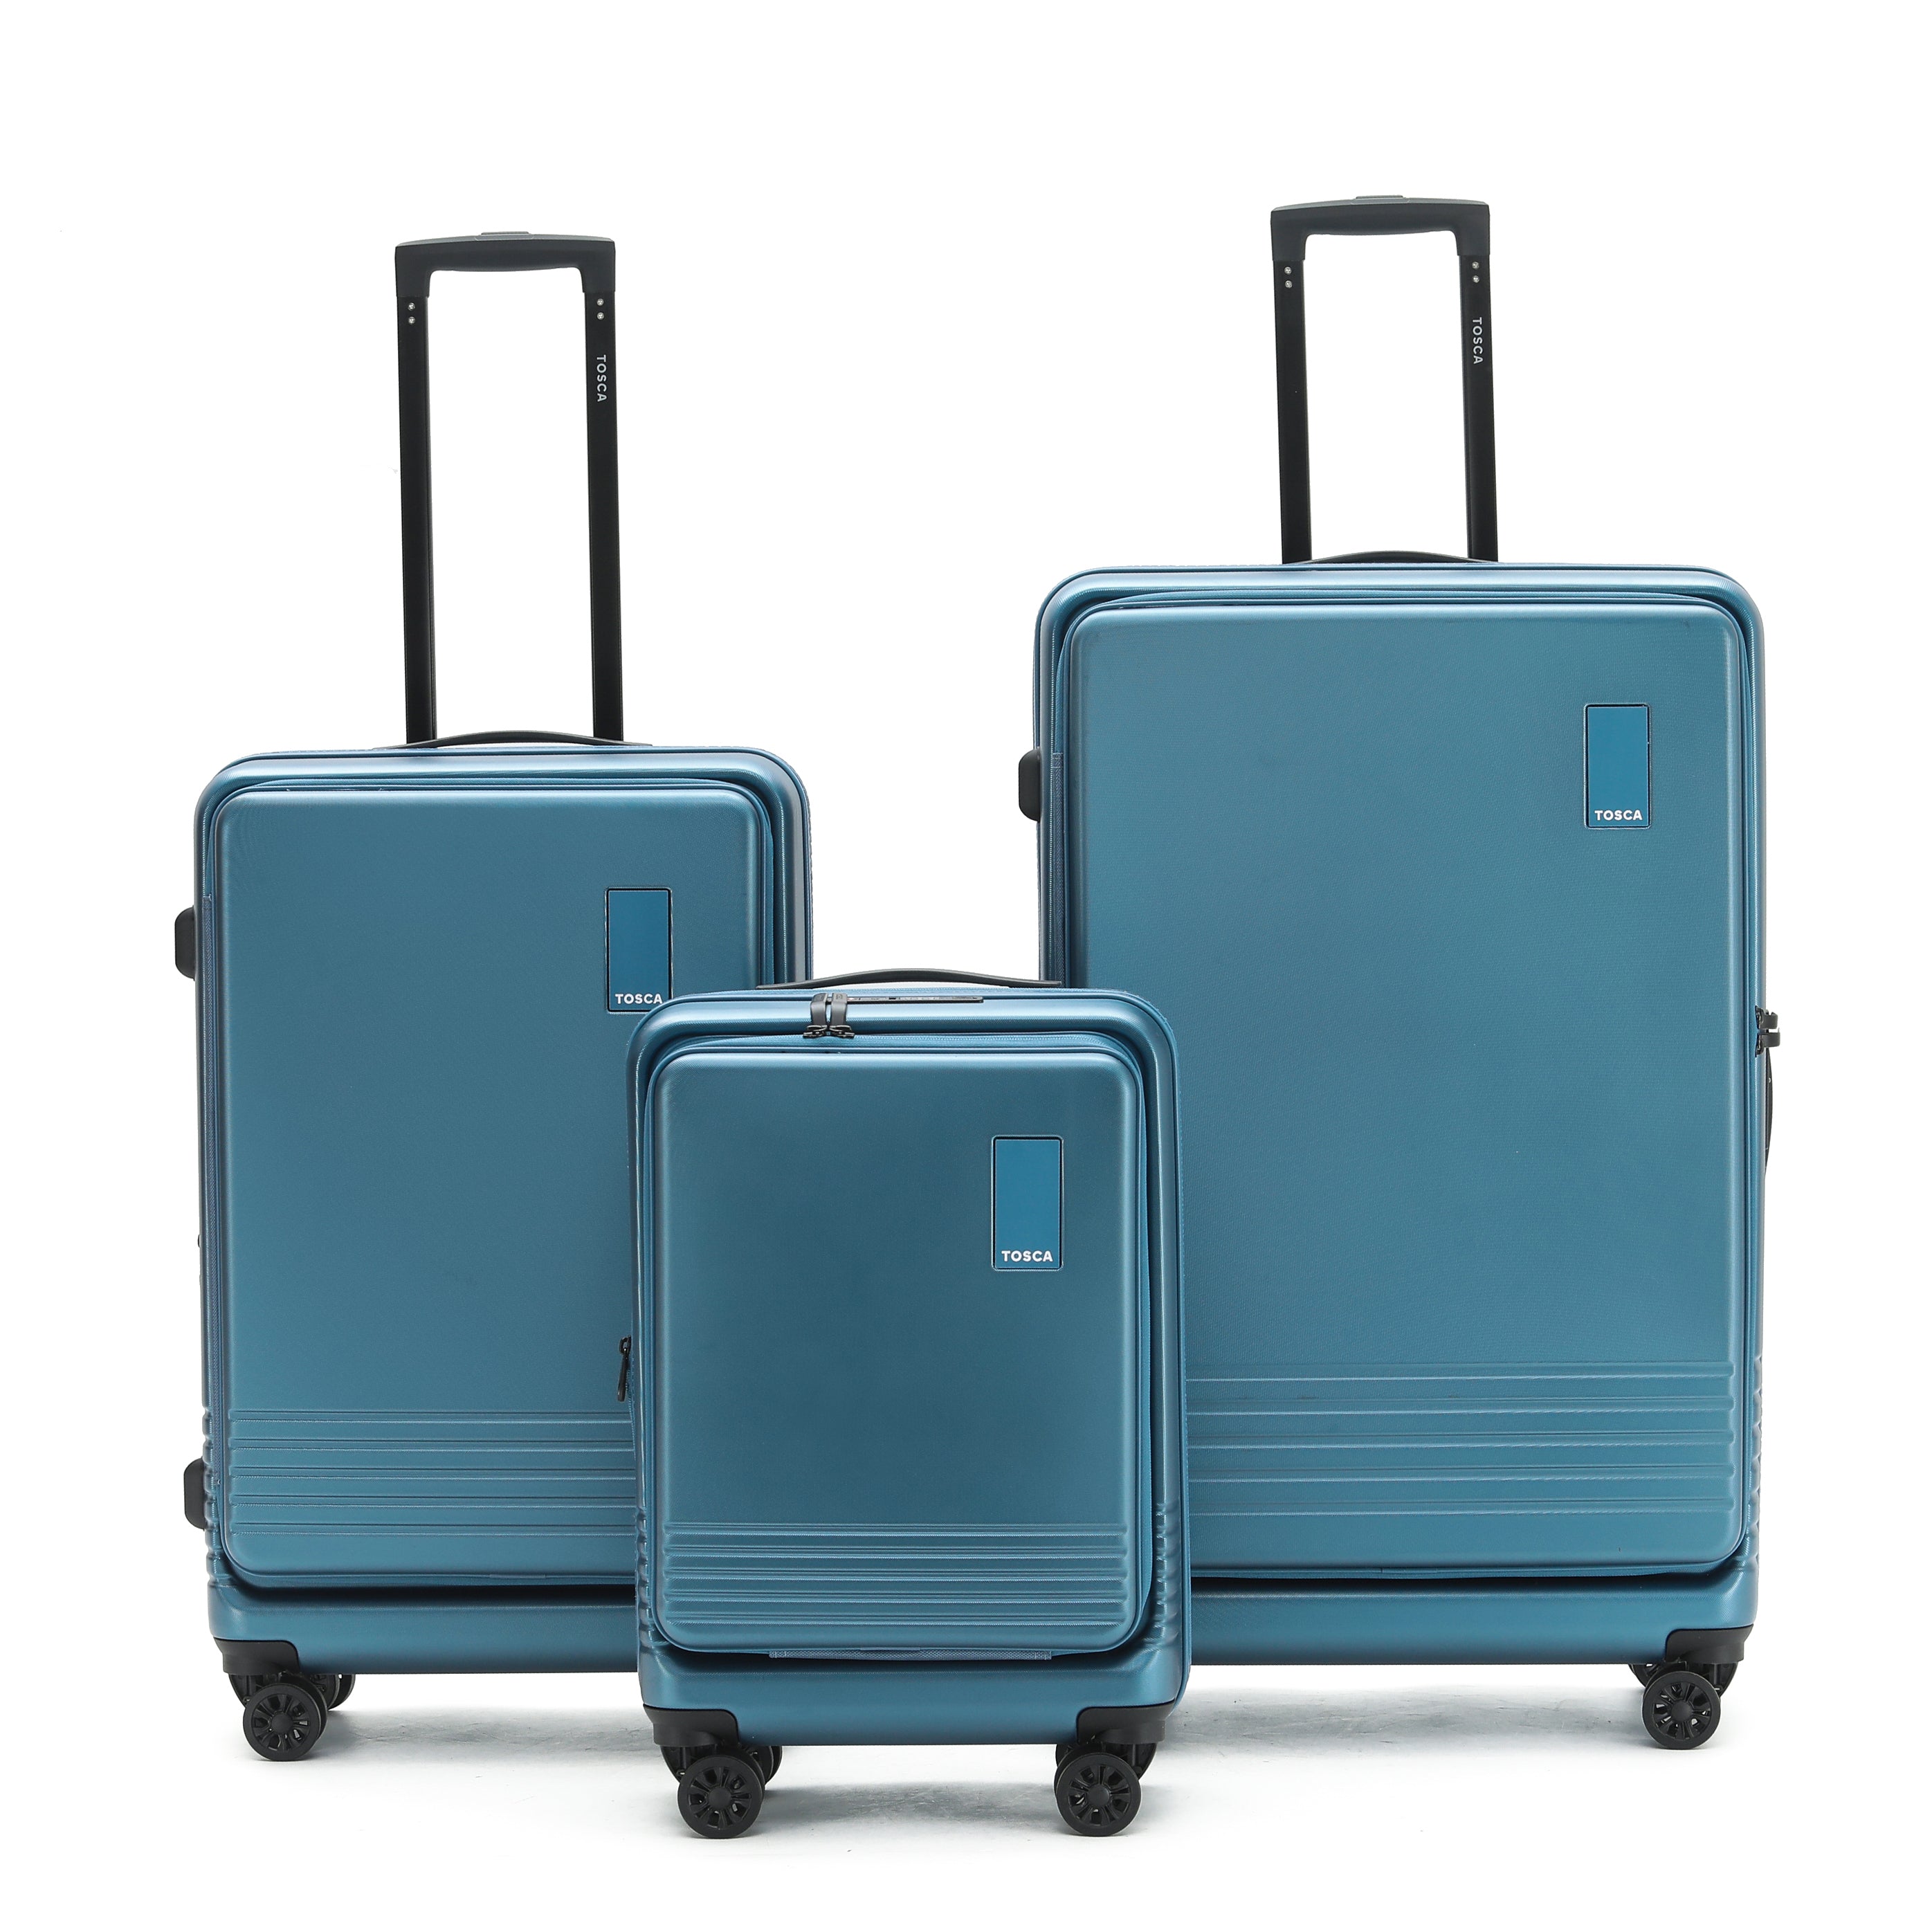 Tosca - TCA644 Horizon Front lid opening Set of 3 suitcases - Blue-1